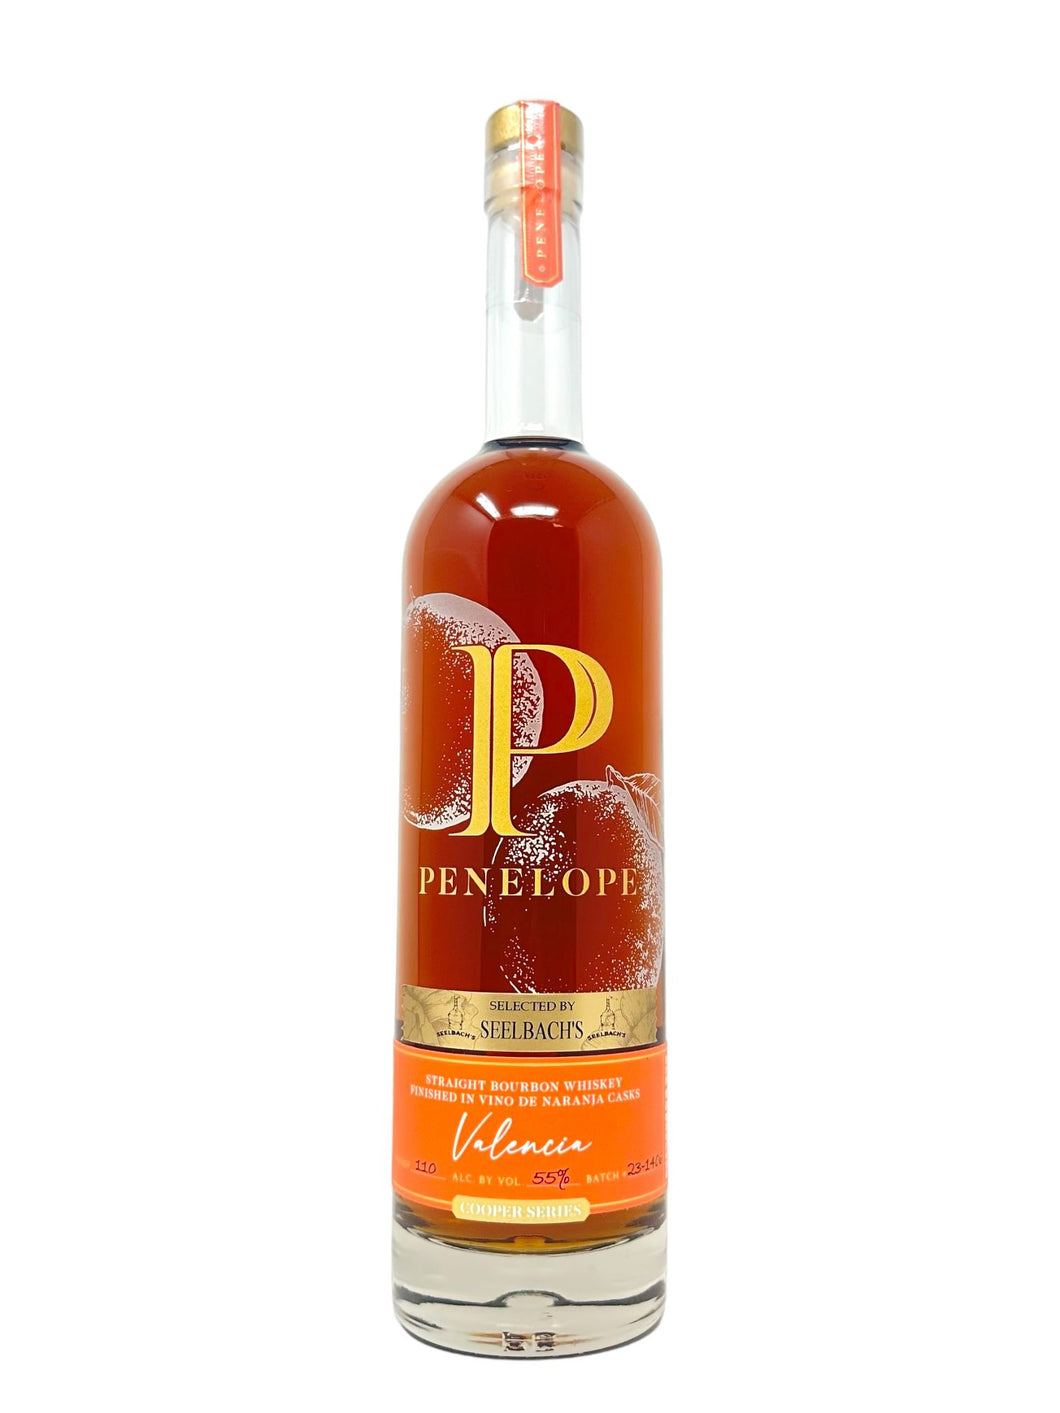 Penelope Valencia Bourbon 110 proof - Selected by Seelbach's